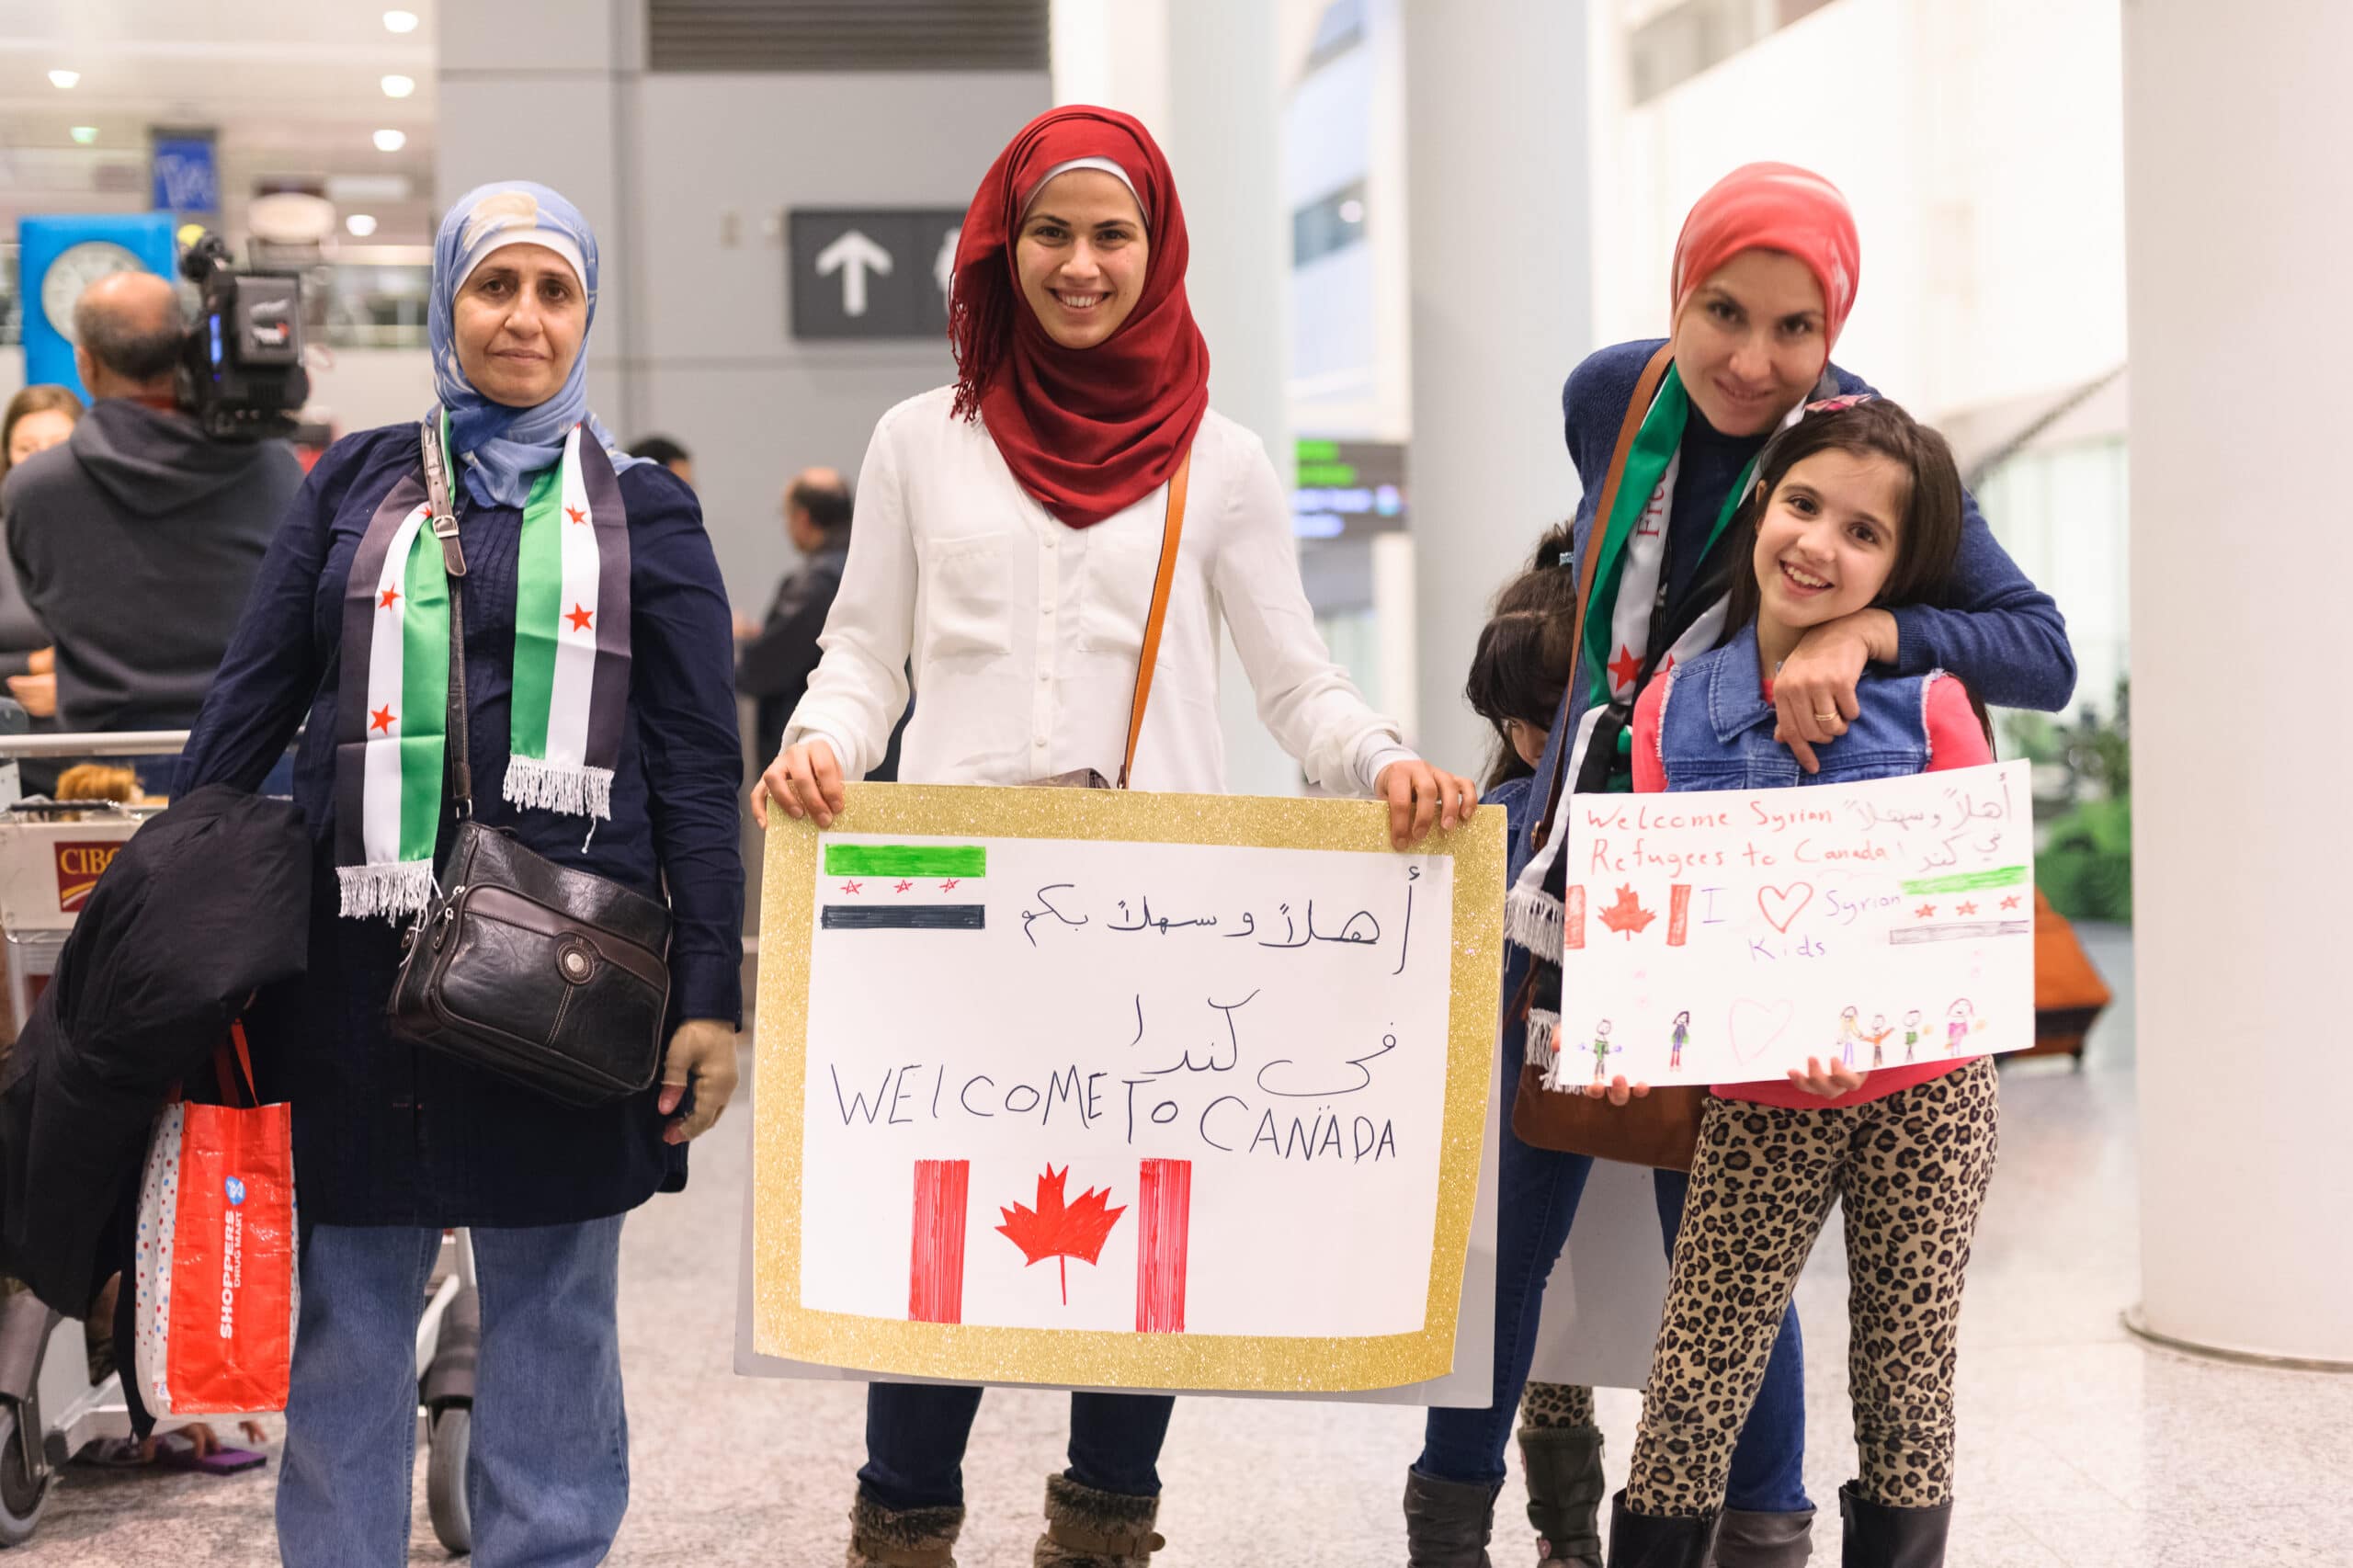 A group of people face the camera. A woman in a hijab holds a sign that says "welcome to Canada". A child holds a welcome sign. They are surrounded by two other people.